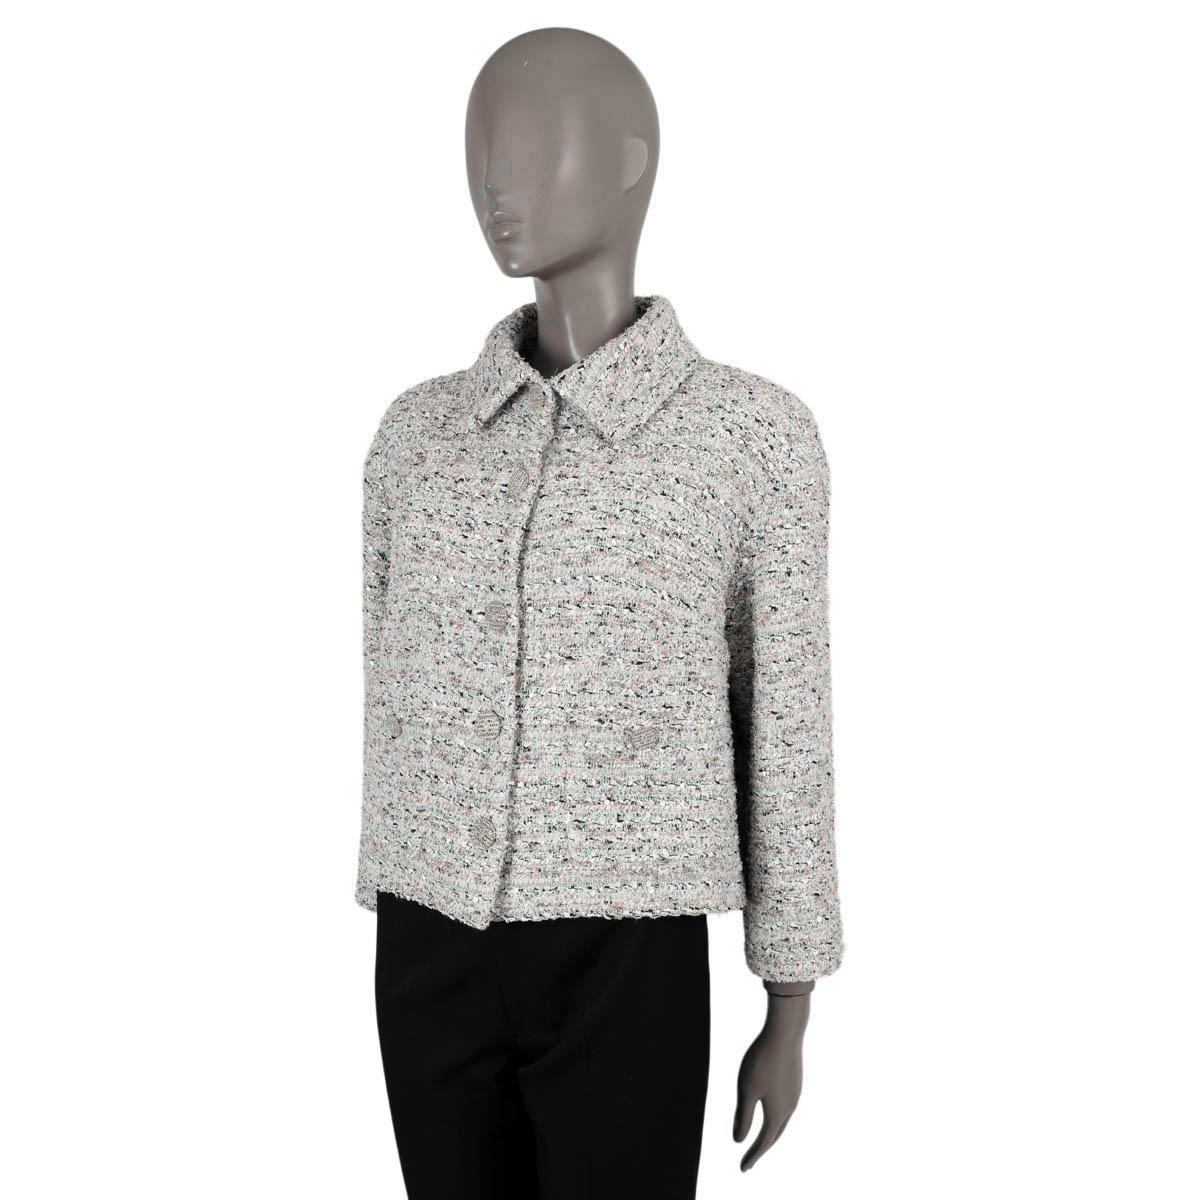 100% authentic CChanel boxy sequin tweed jacket in white, turquoise, pale pink, lilac and black cotton (49%), polyamide (20%), polyester (18%), acetate (6%), acrylic (6%) and viscose (1%). Features a straight cut with two buttoned pockets at the